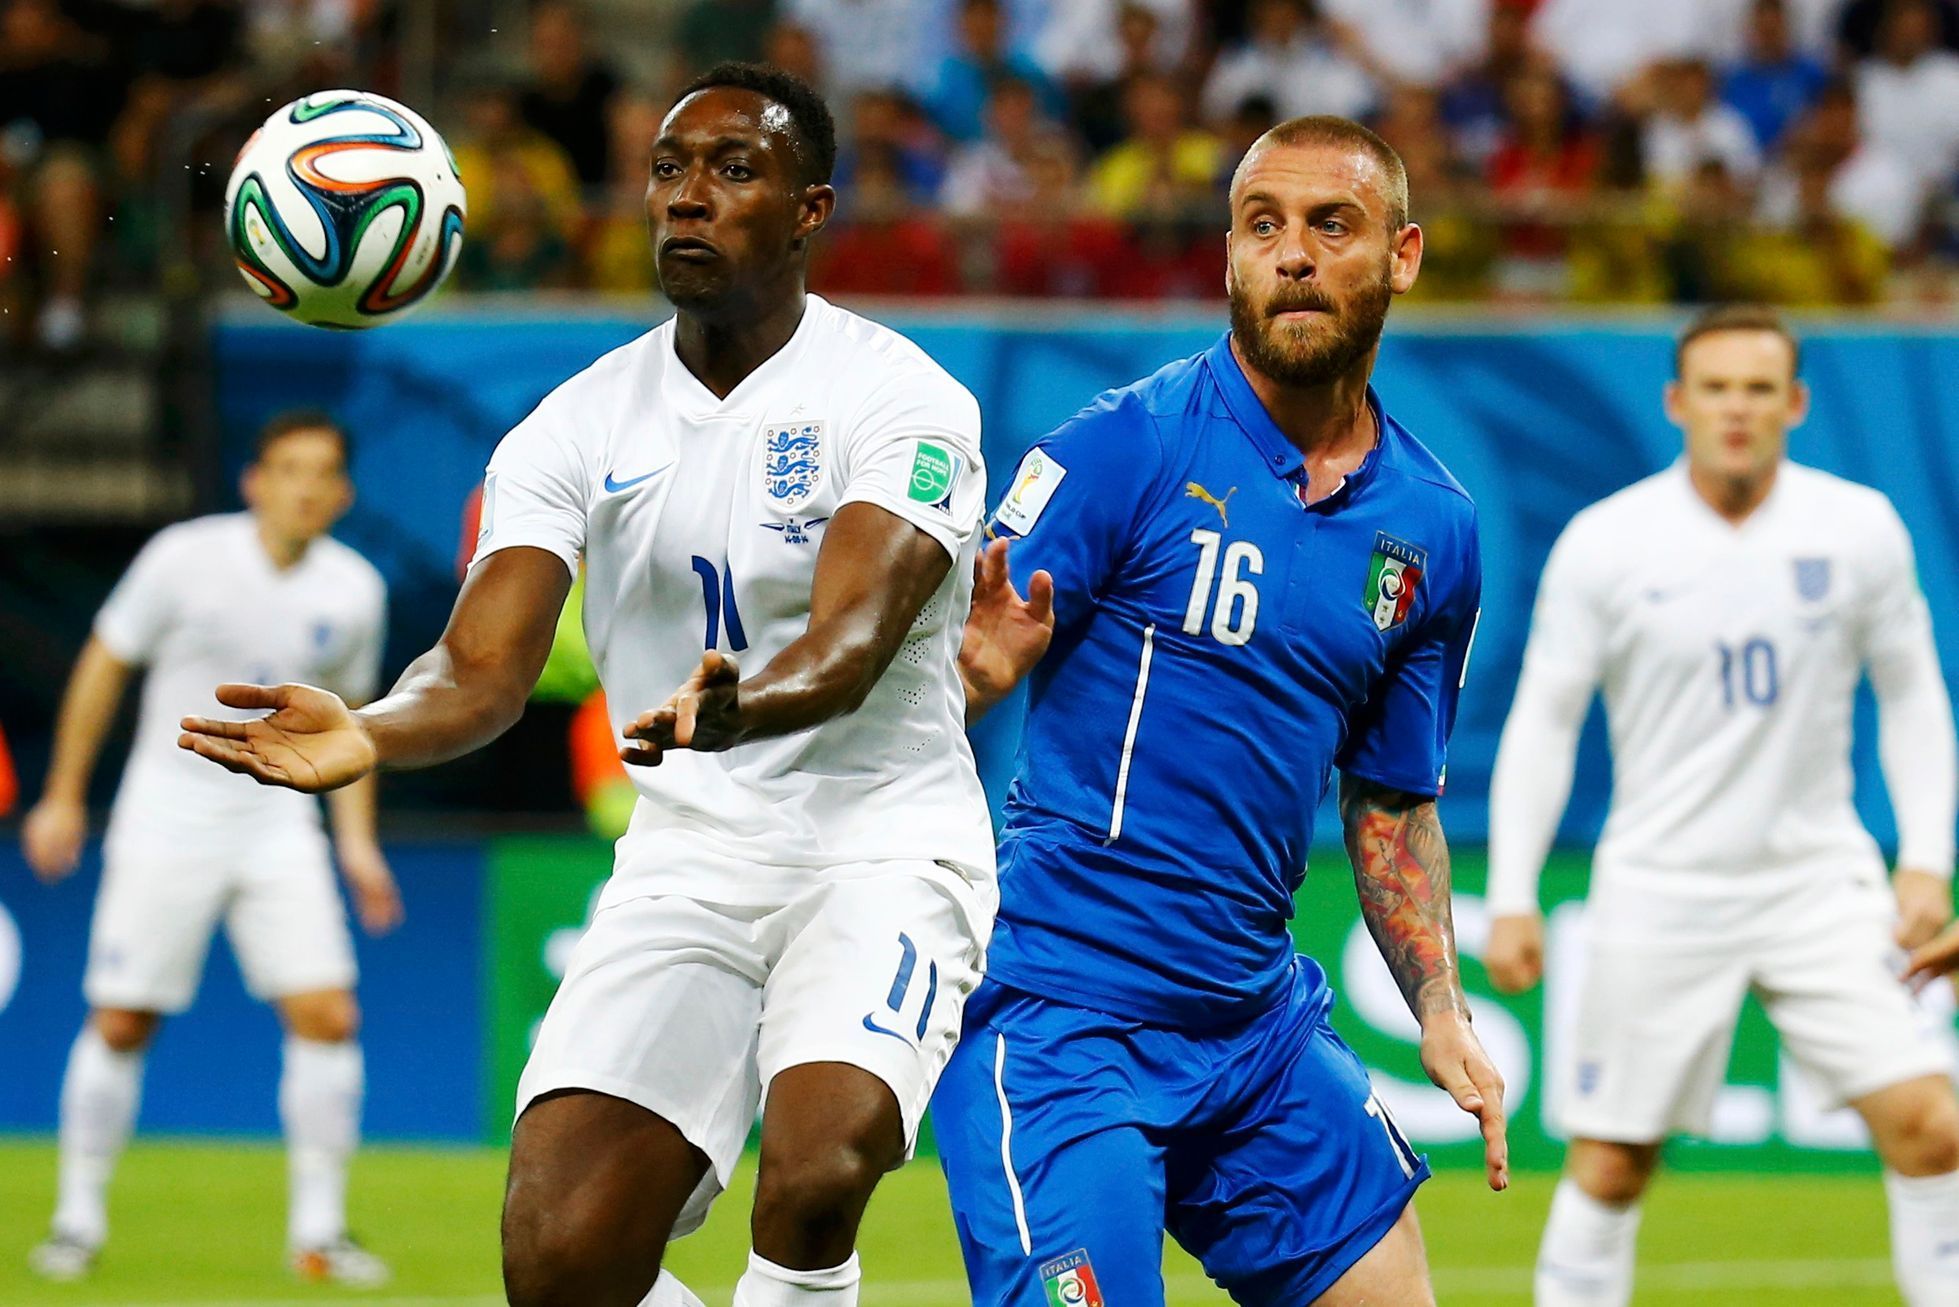 England's Welbeck fights for the ball with Itlay's De Rossi during their 2014 World Cup Group D soccer match at the Amazonia arena in Manaus